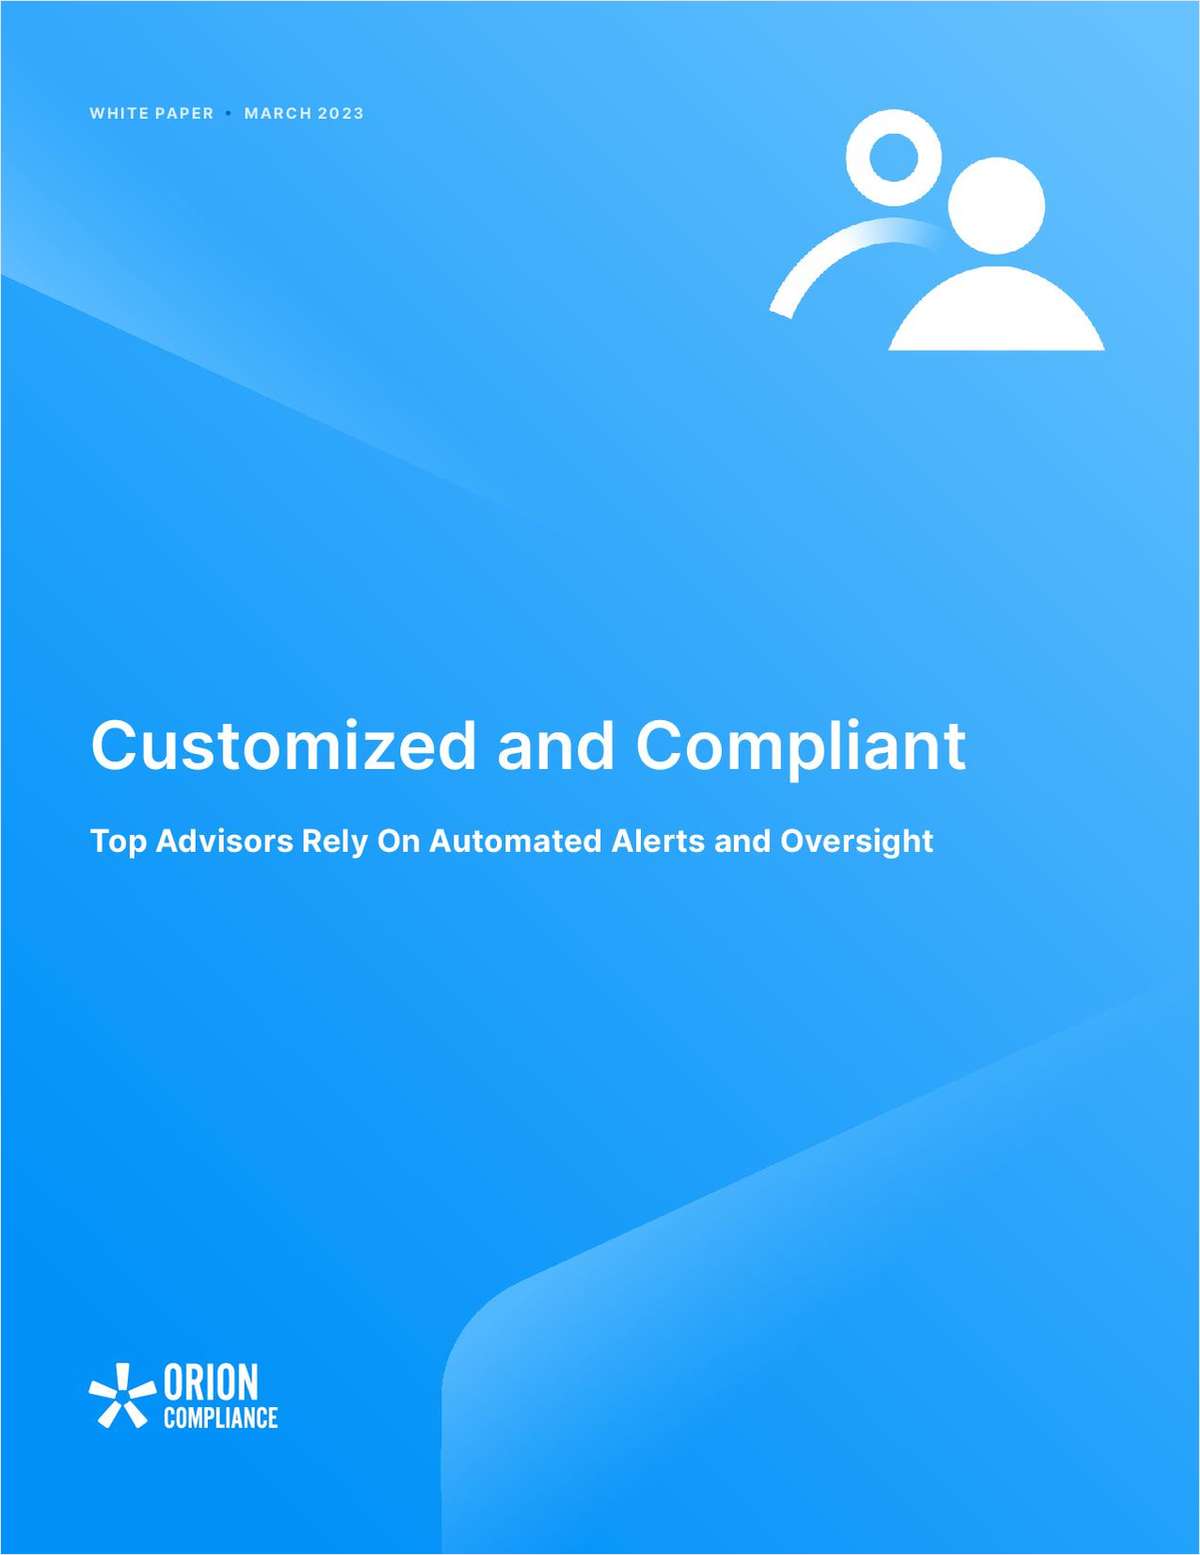 Reduce Client Risk with Automated Compliance Alerts and Oversight